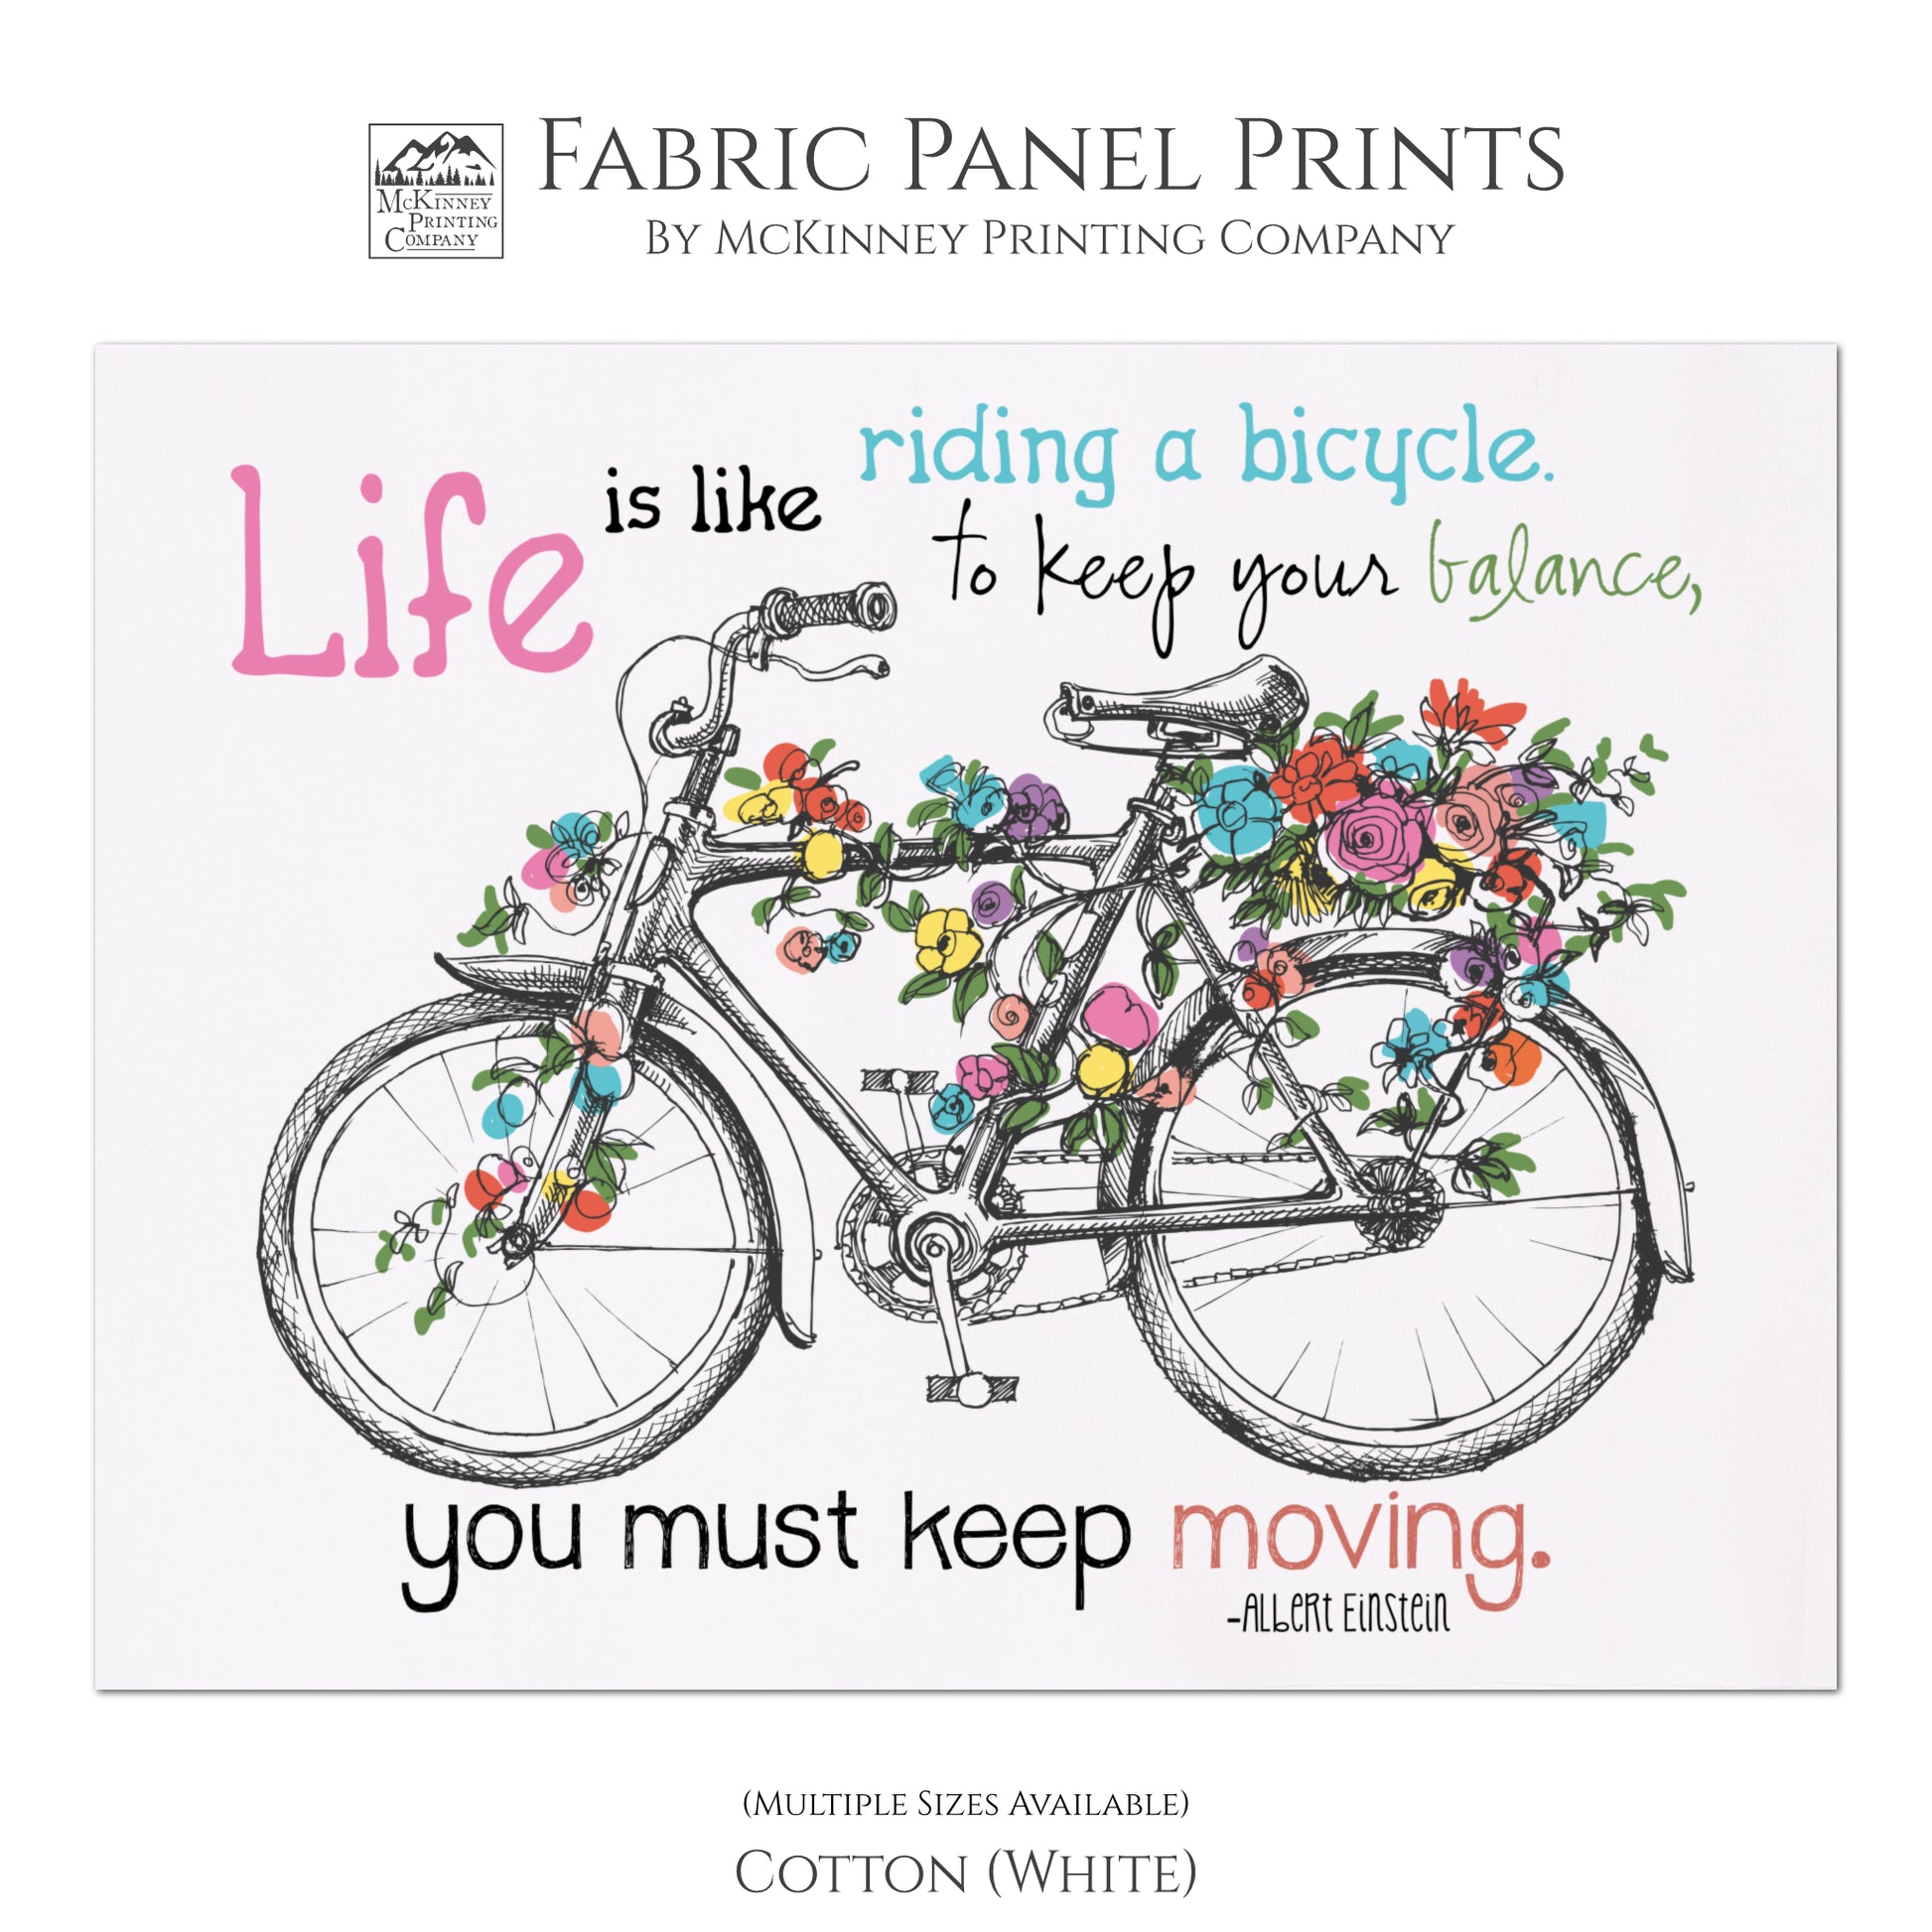 Inspirational Fabric - Albert Einstein Quotes About Life, Cotton Quilt Block, Wall Art, Bike and Flowers - Life is like riding a bicycle.  To keep your balance, you must keep moving - Cotton, White